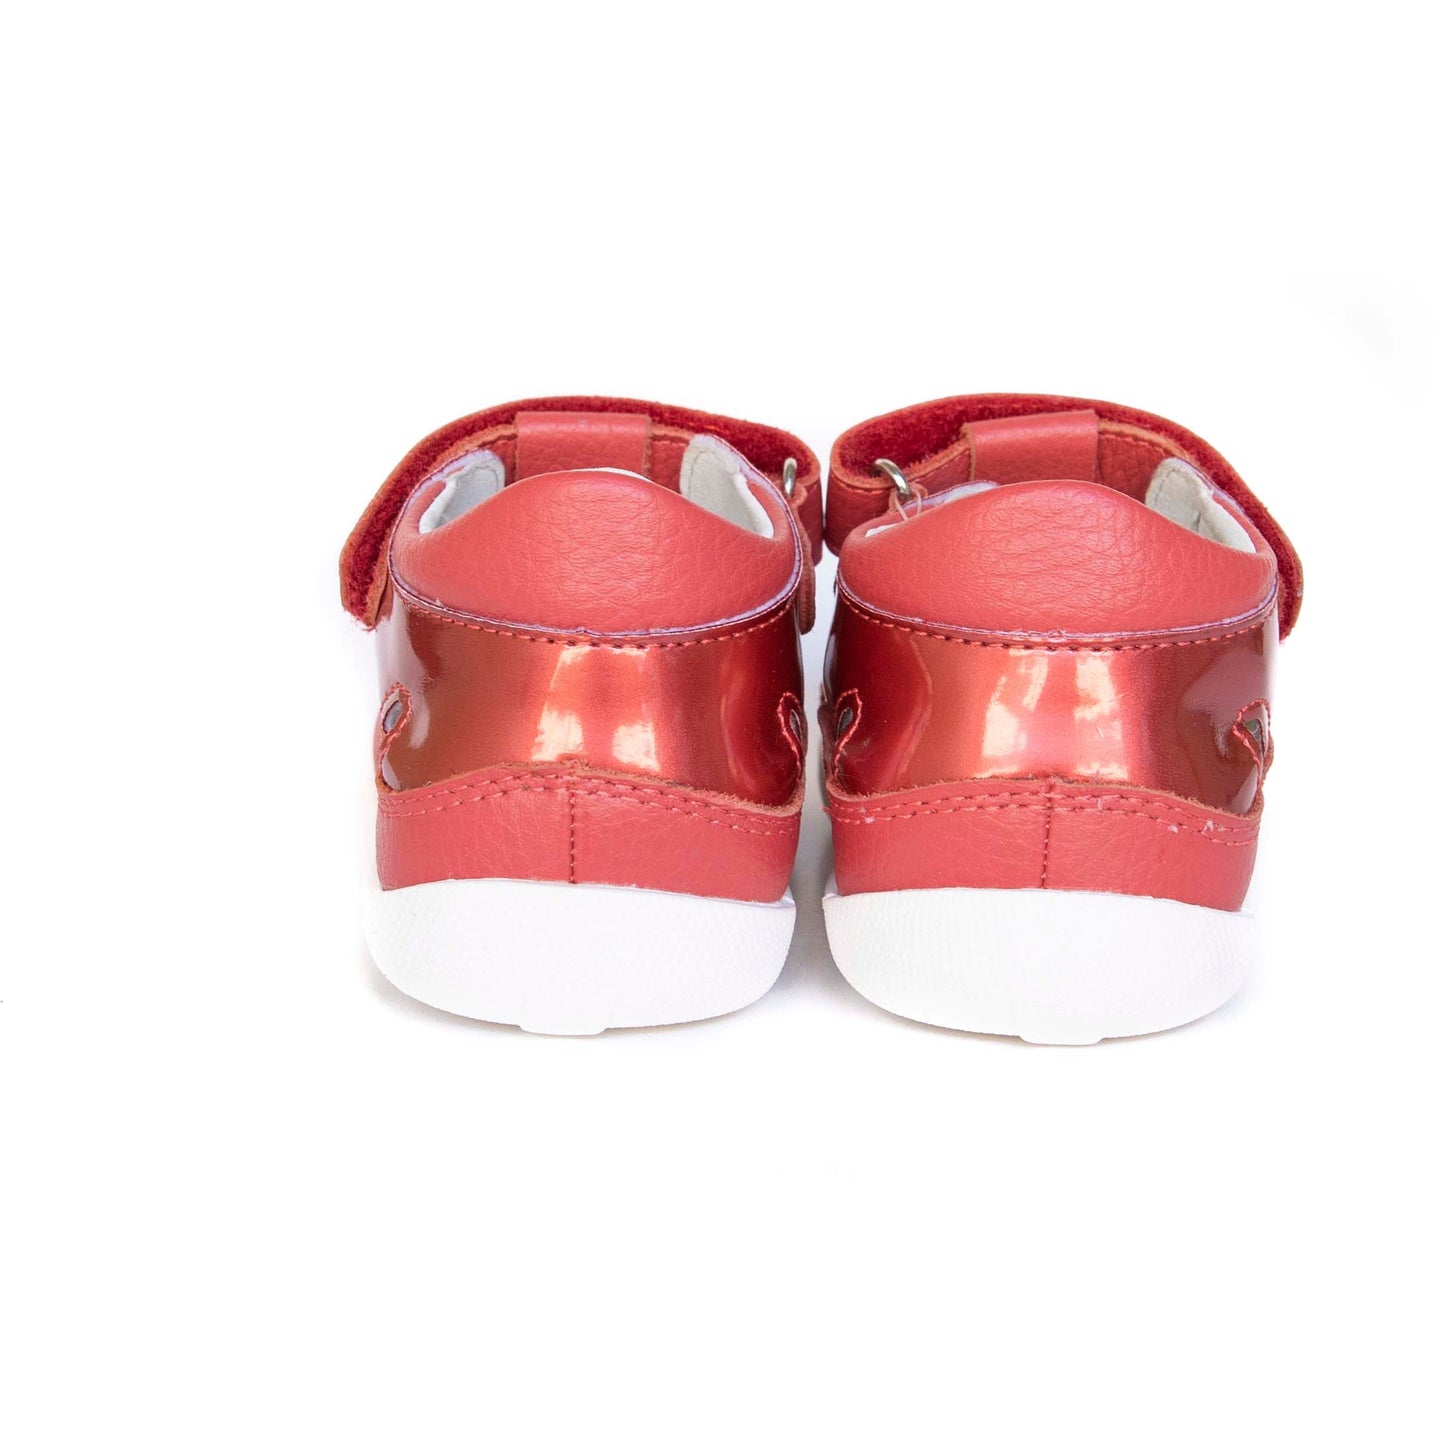 The back of these toddler girl red shoes by PROTETIKA consists of solid heel counters, which help the ankles keep a straight position.